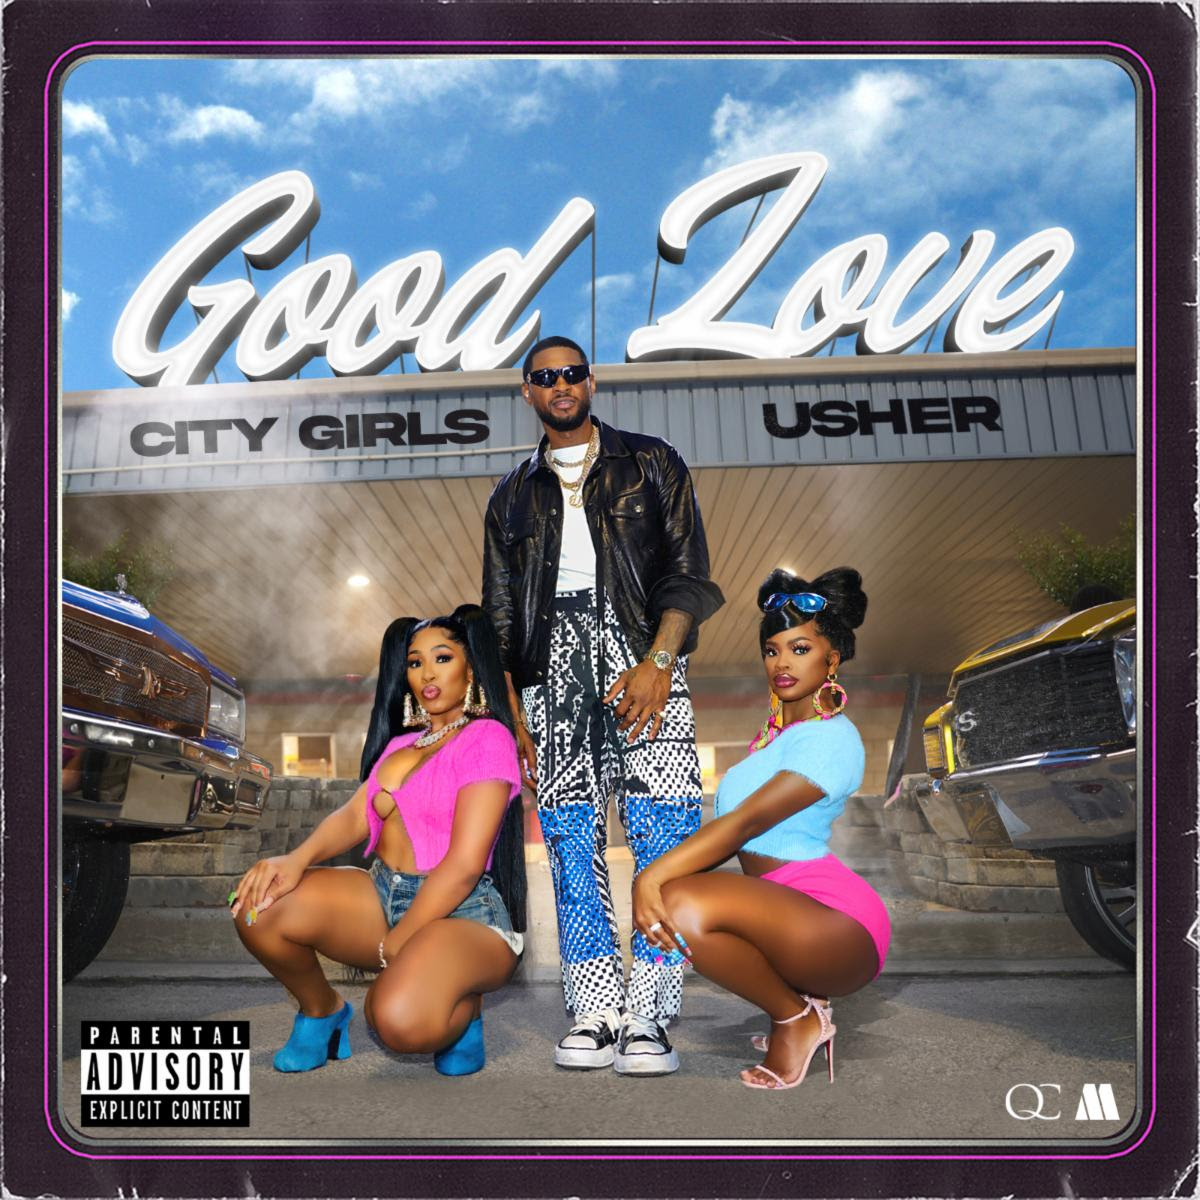 City Girls Are Joined by Usher for New Single and Video 